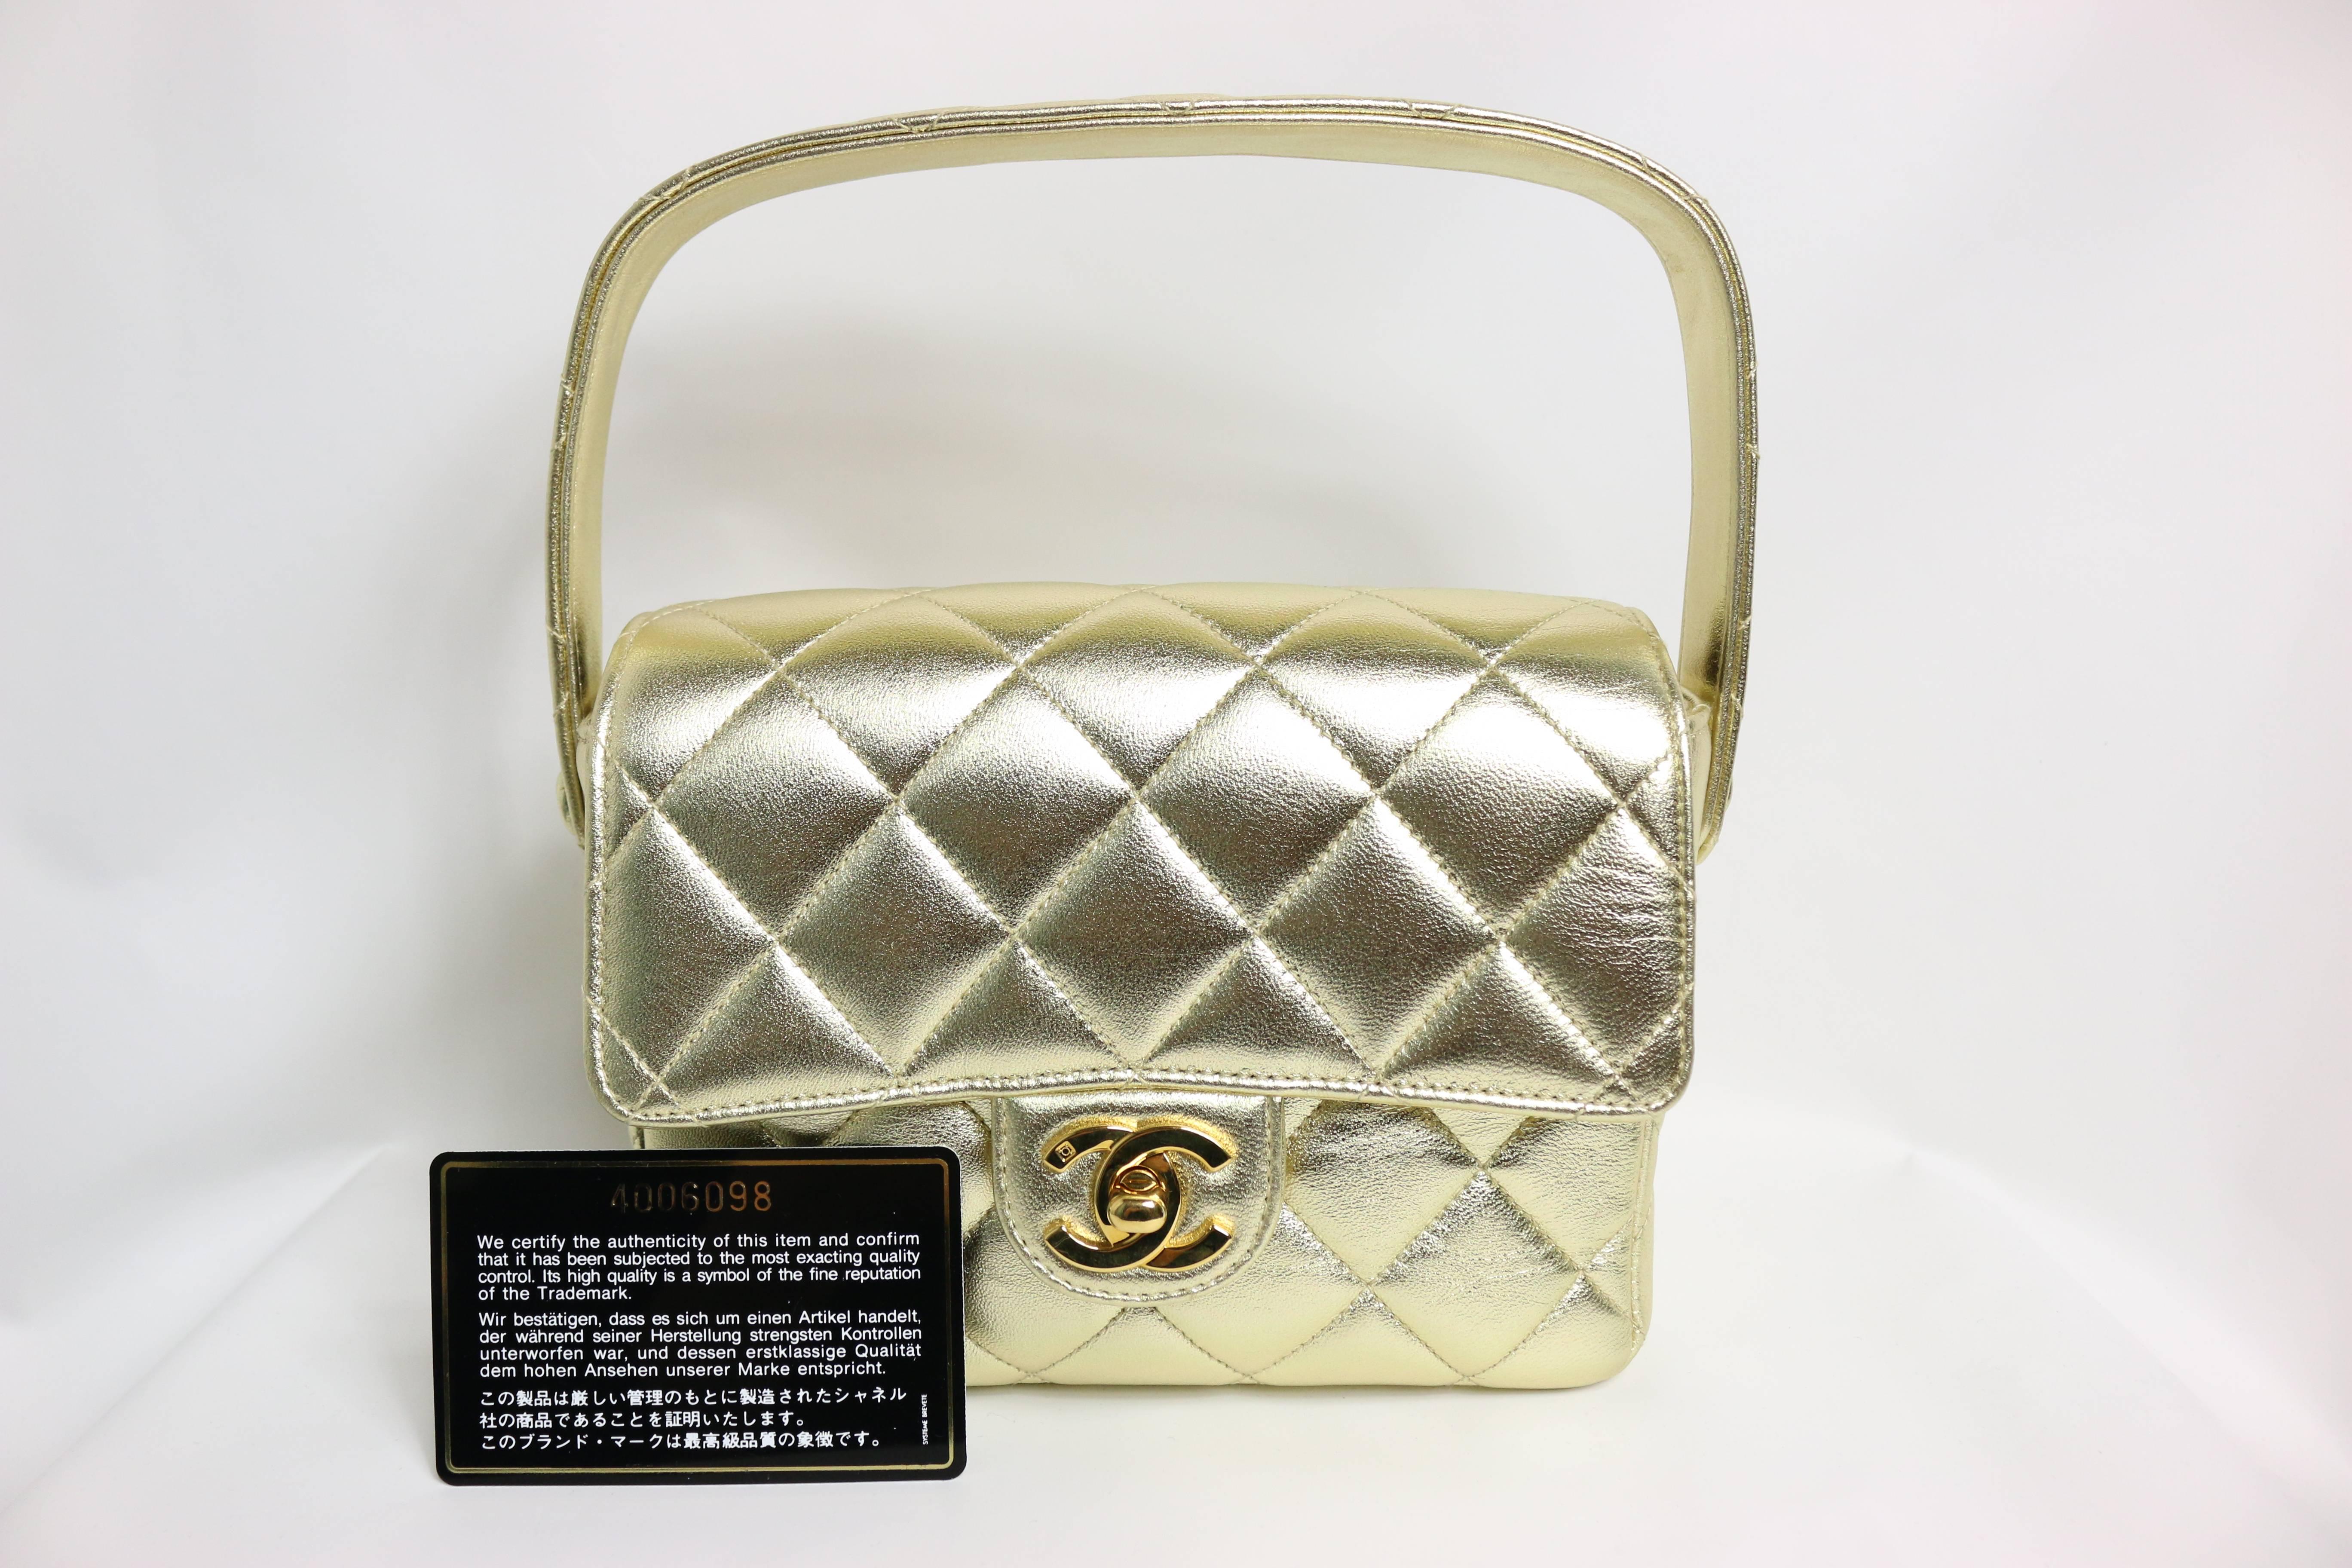 Chanel Square Mini Gold Metallic Lambskin Quilted  Flap Handbag   In Excellent Condition For Sale In Sheung Wan, HK